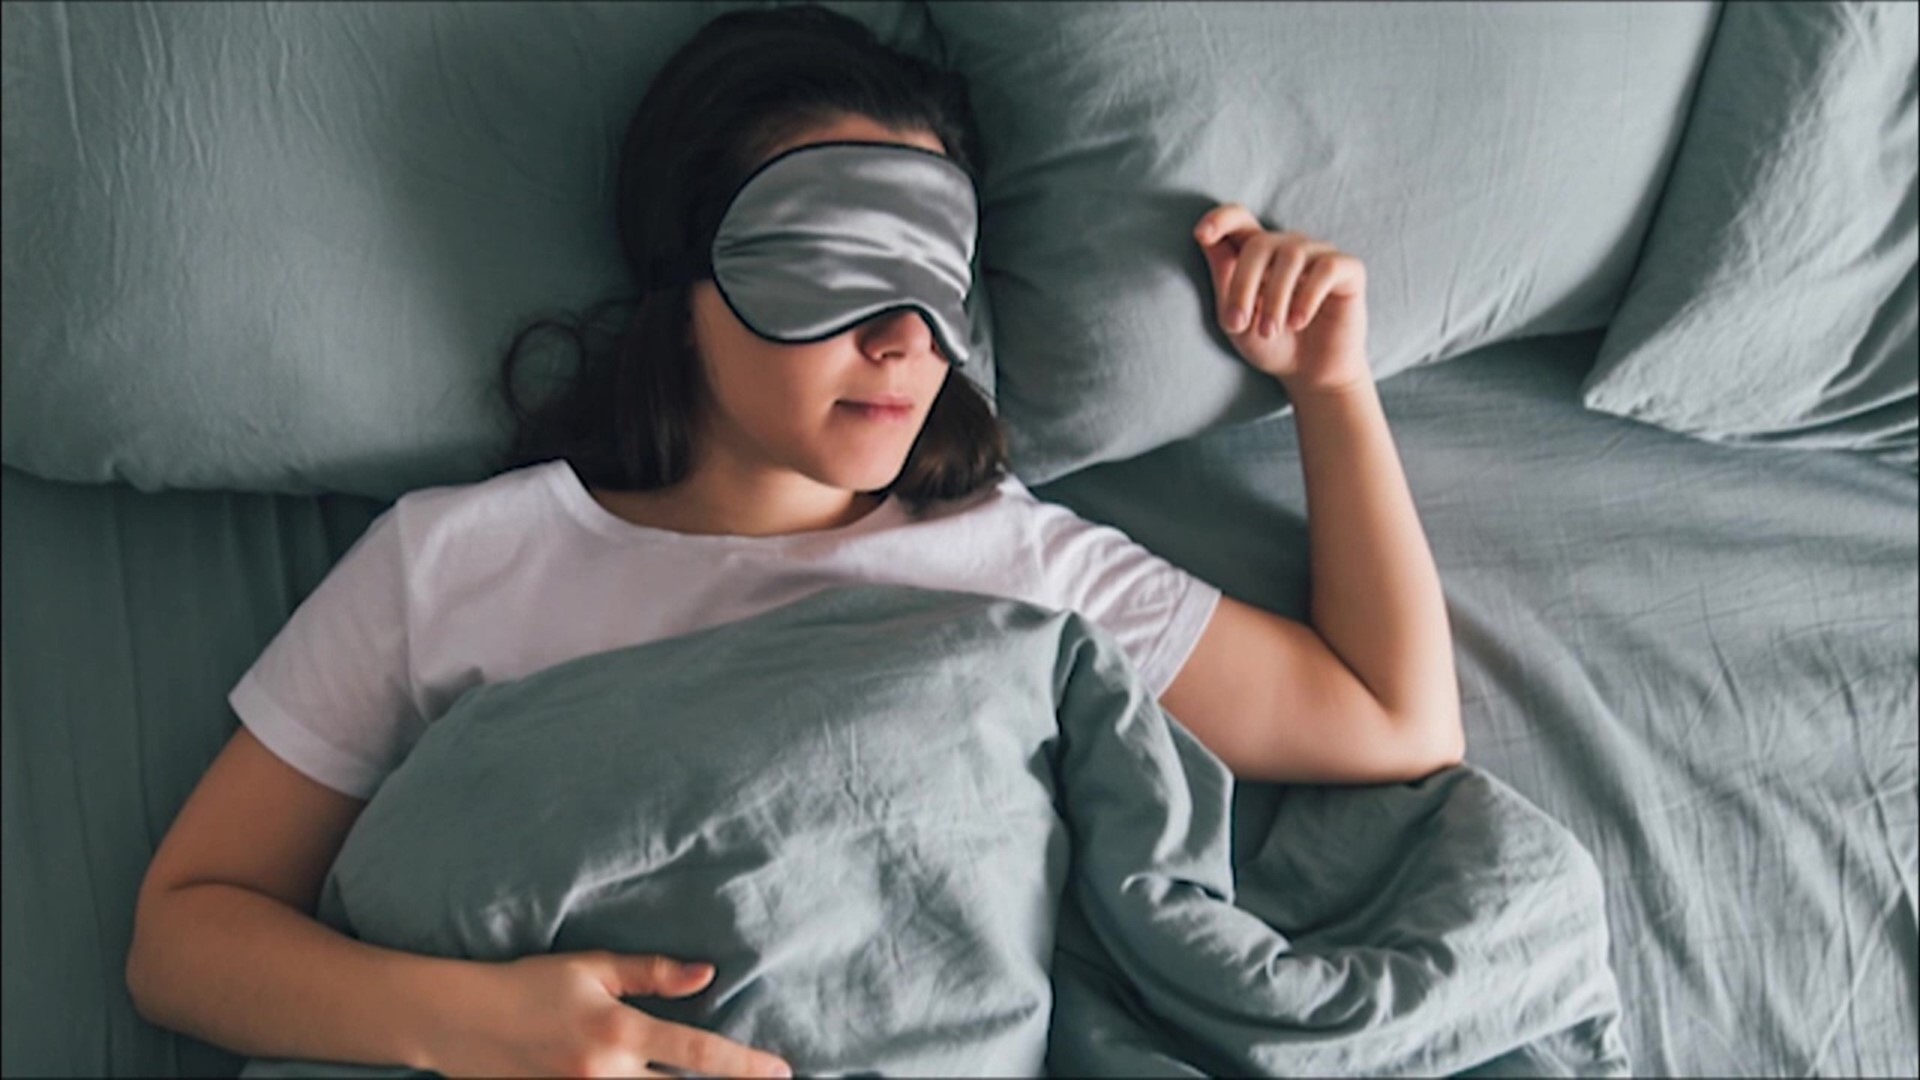 This is National Sleep Awareness Week, a time to recognize the connection between our sleep and our health.